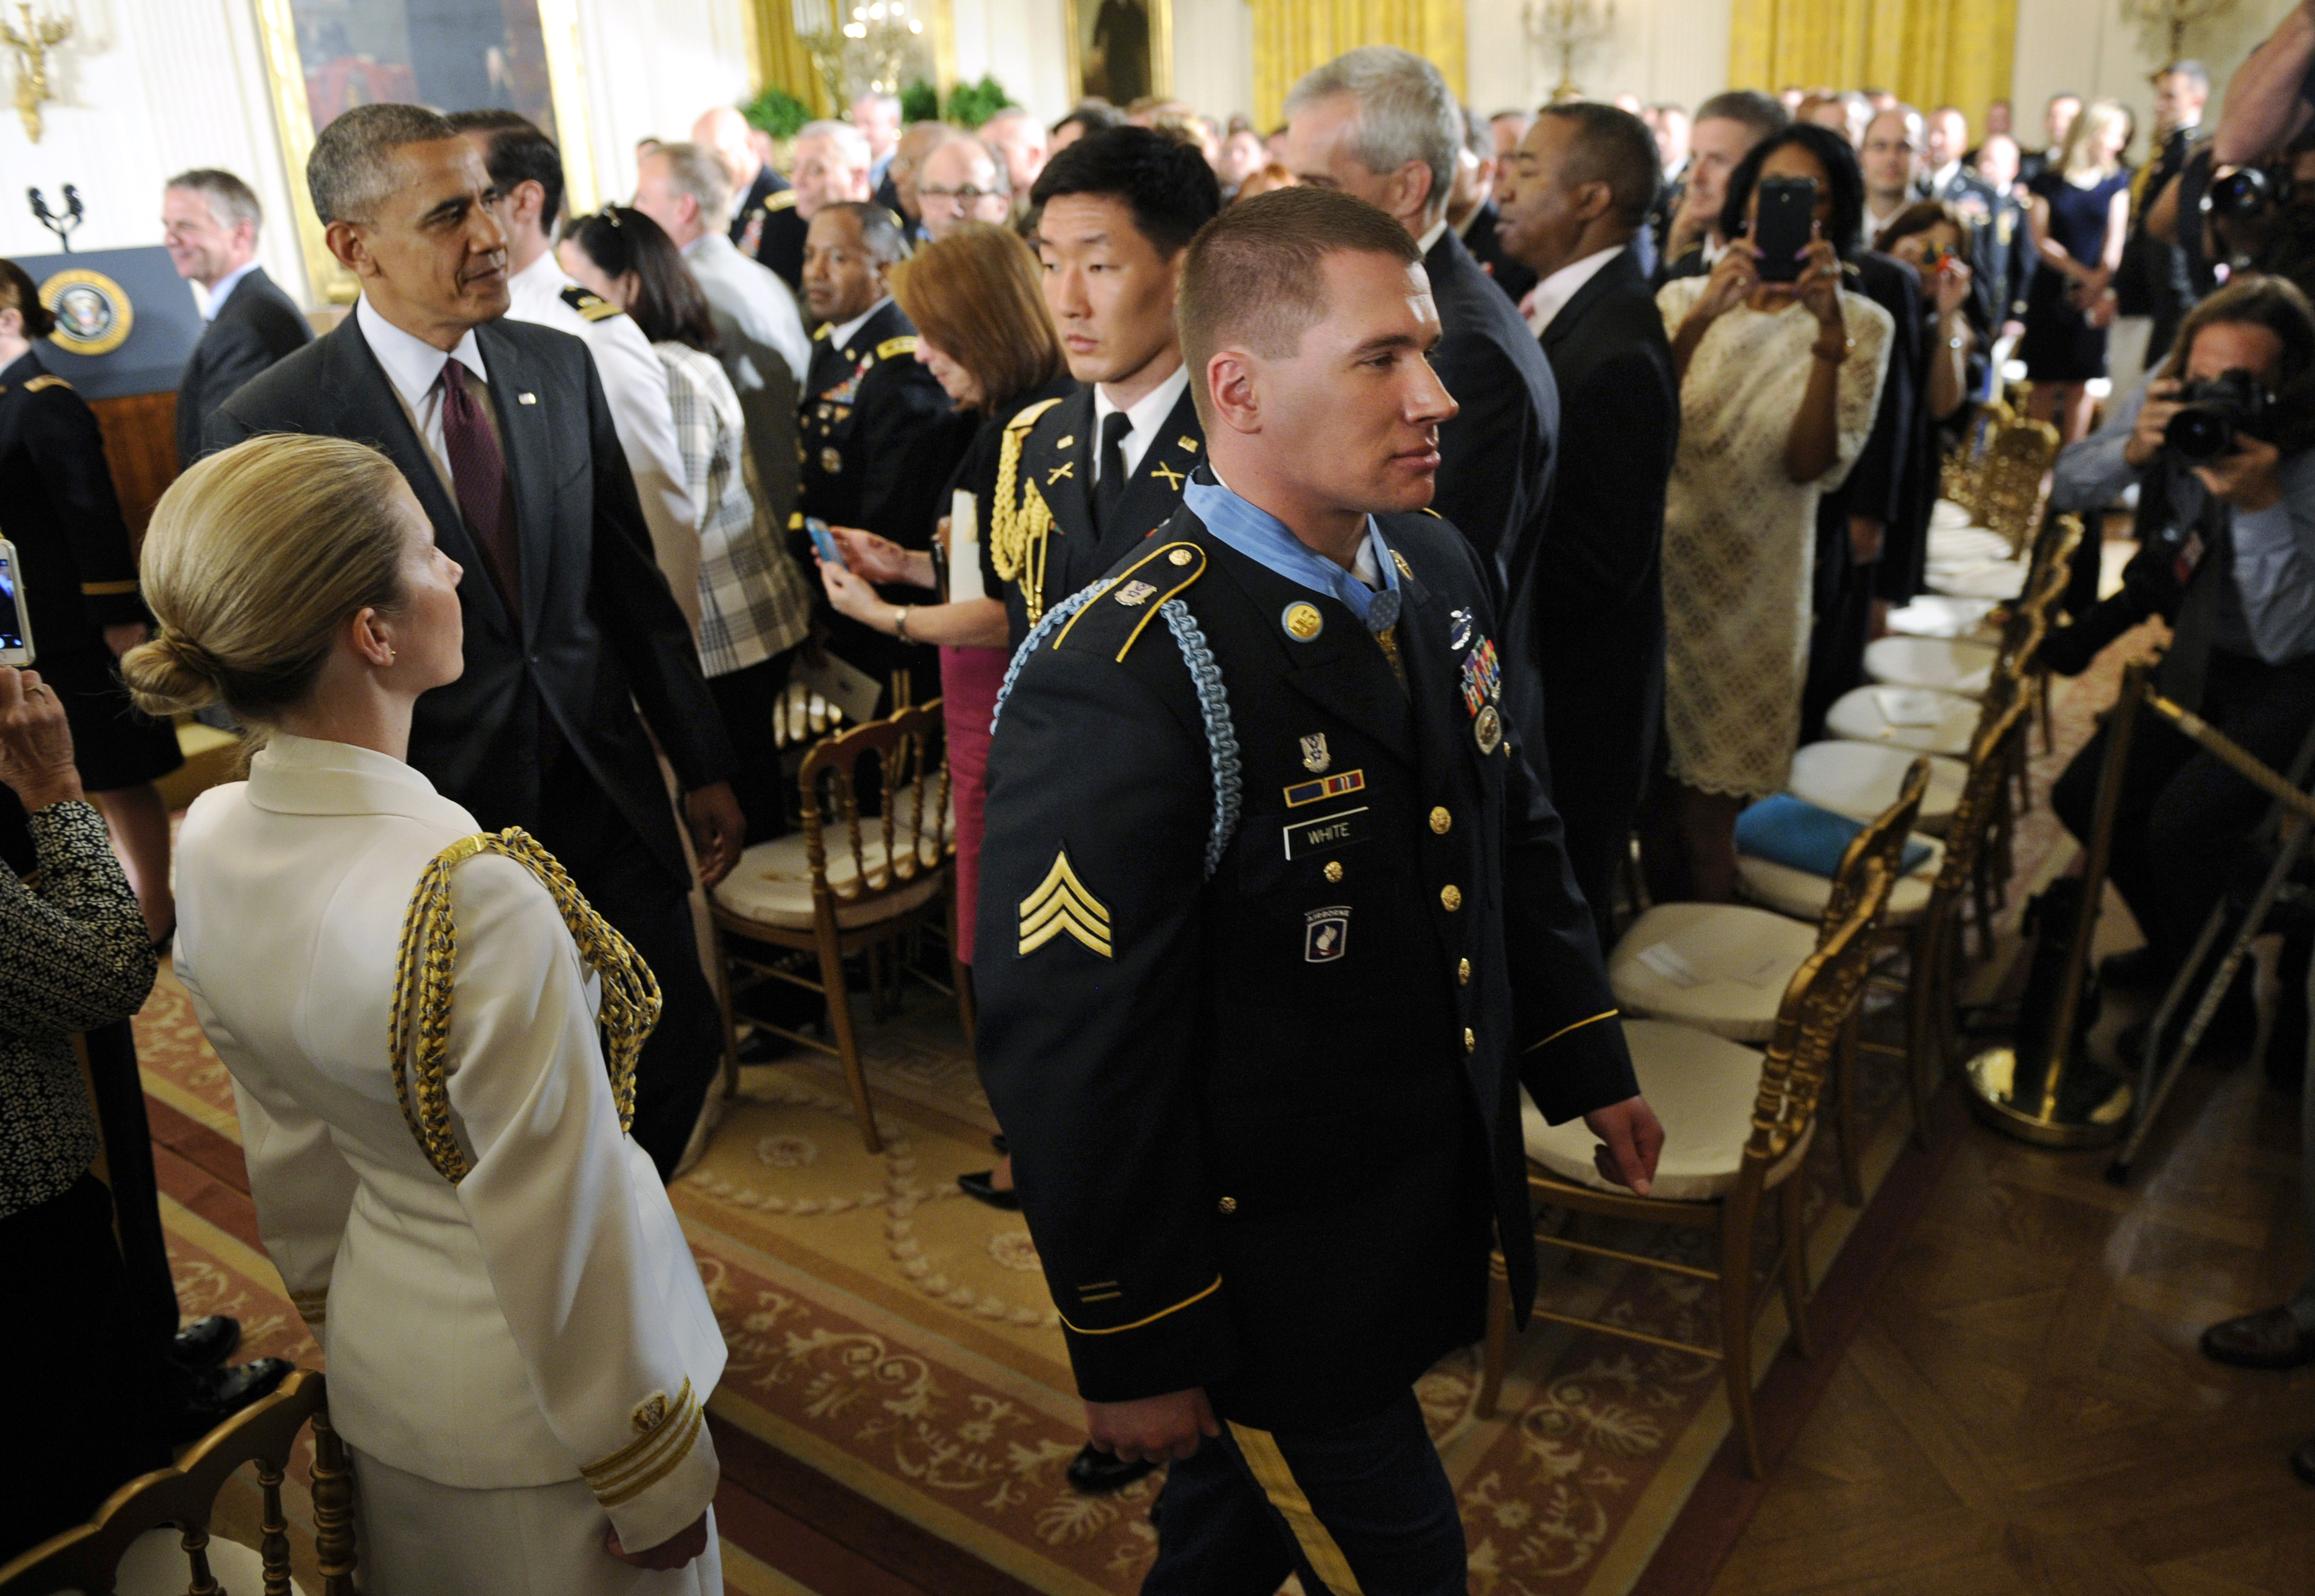 President Barack Obama follows the newest Medal of Honor recipient, former Army Sgt. Kyle J. White, following a ceremony in the East Room of the White House in Washington, Tuesday, May 13, 2014. White is a former Army sergeant who saved a fellow soldier's life and helped secure the evacuation of other wounded Americans while under persistent fire during a 2007 ambush in Afghanistan. White is the seventh living recipient to be awarded the Medal of Honor for actions in Iraq or Afghanistan. (AP Photo)